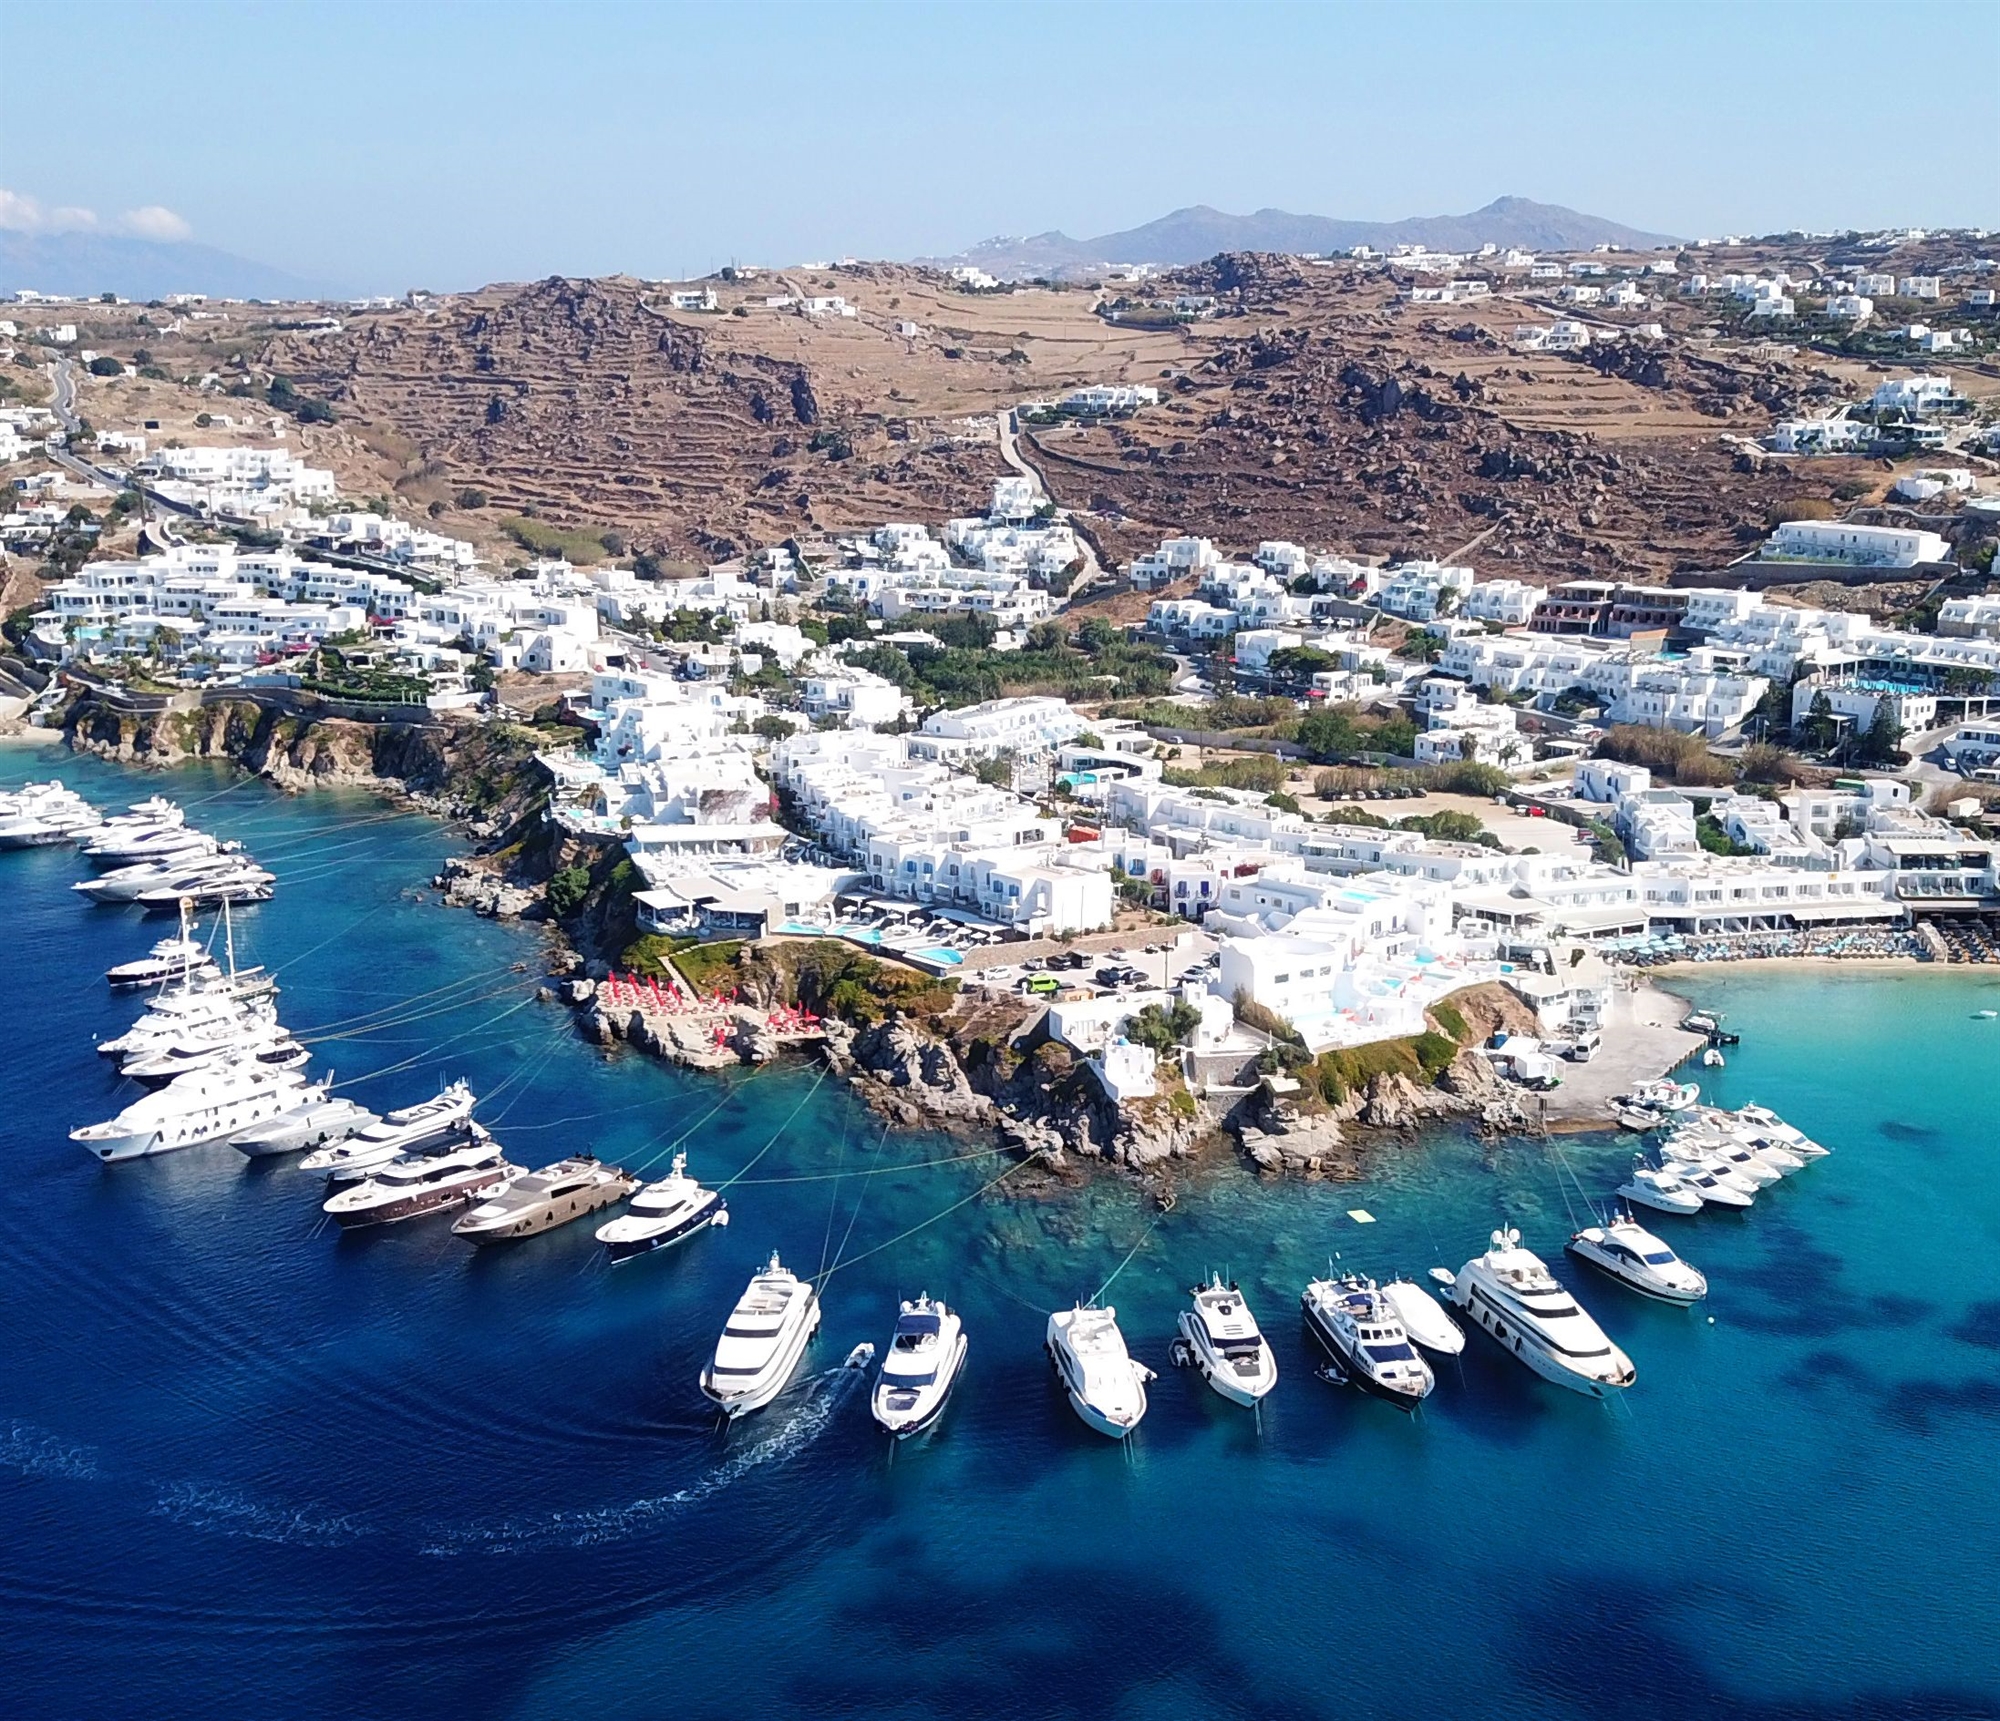 New fast-track investment on Mykonos with a special plan